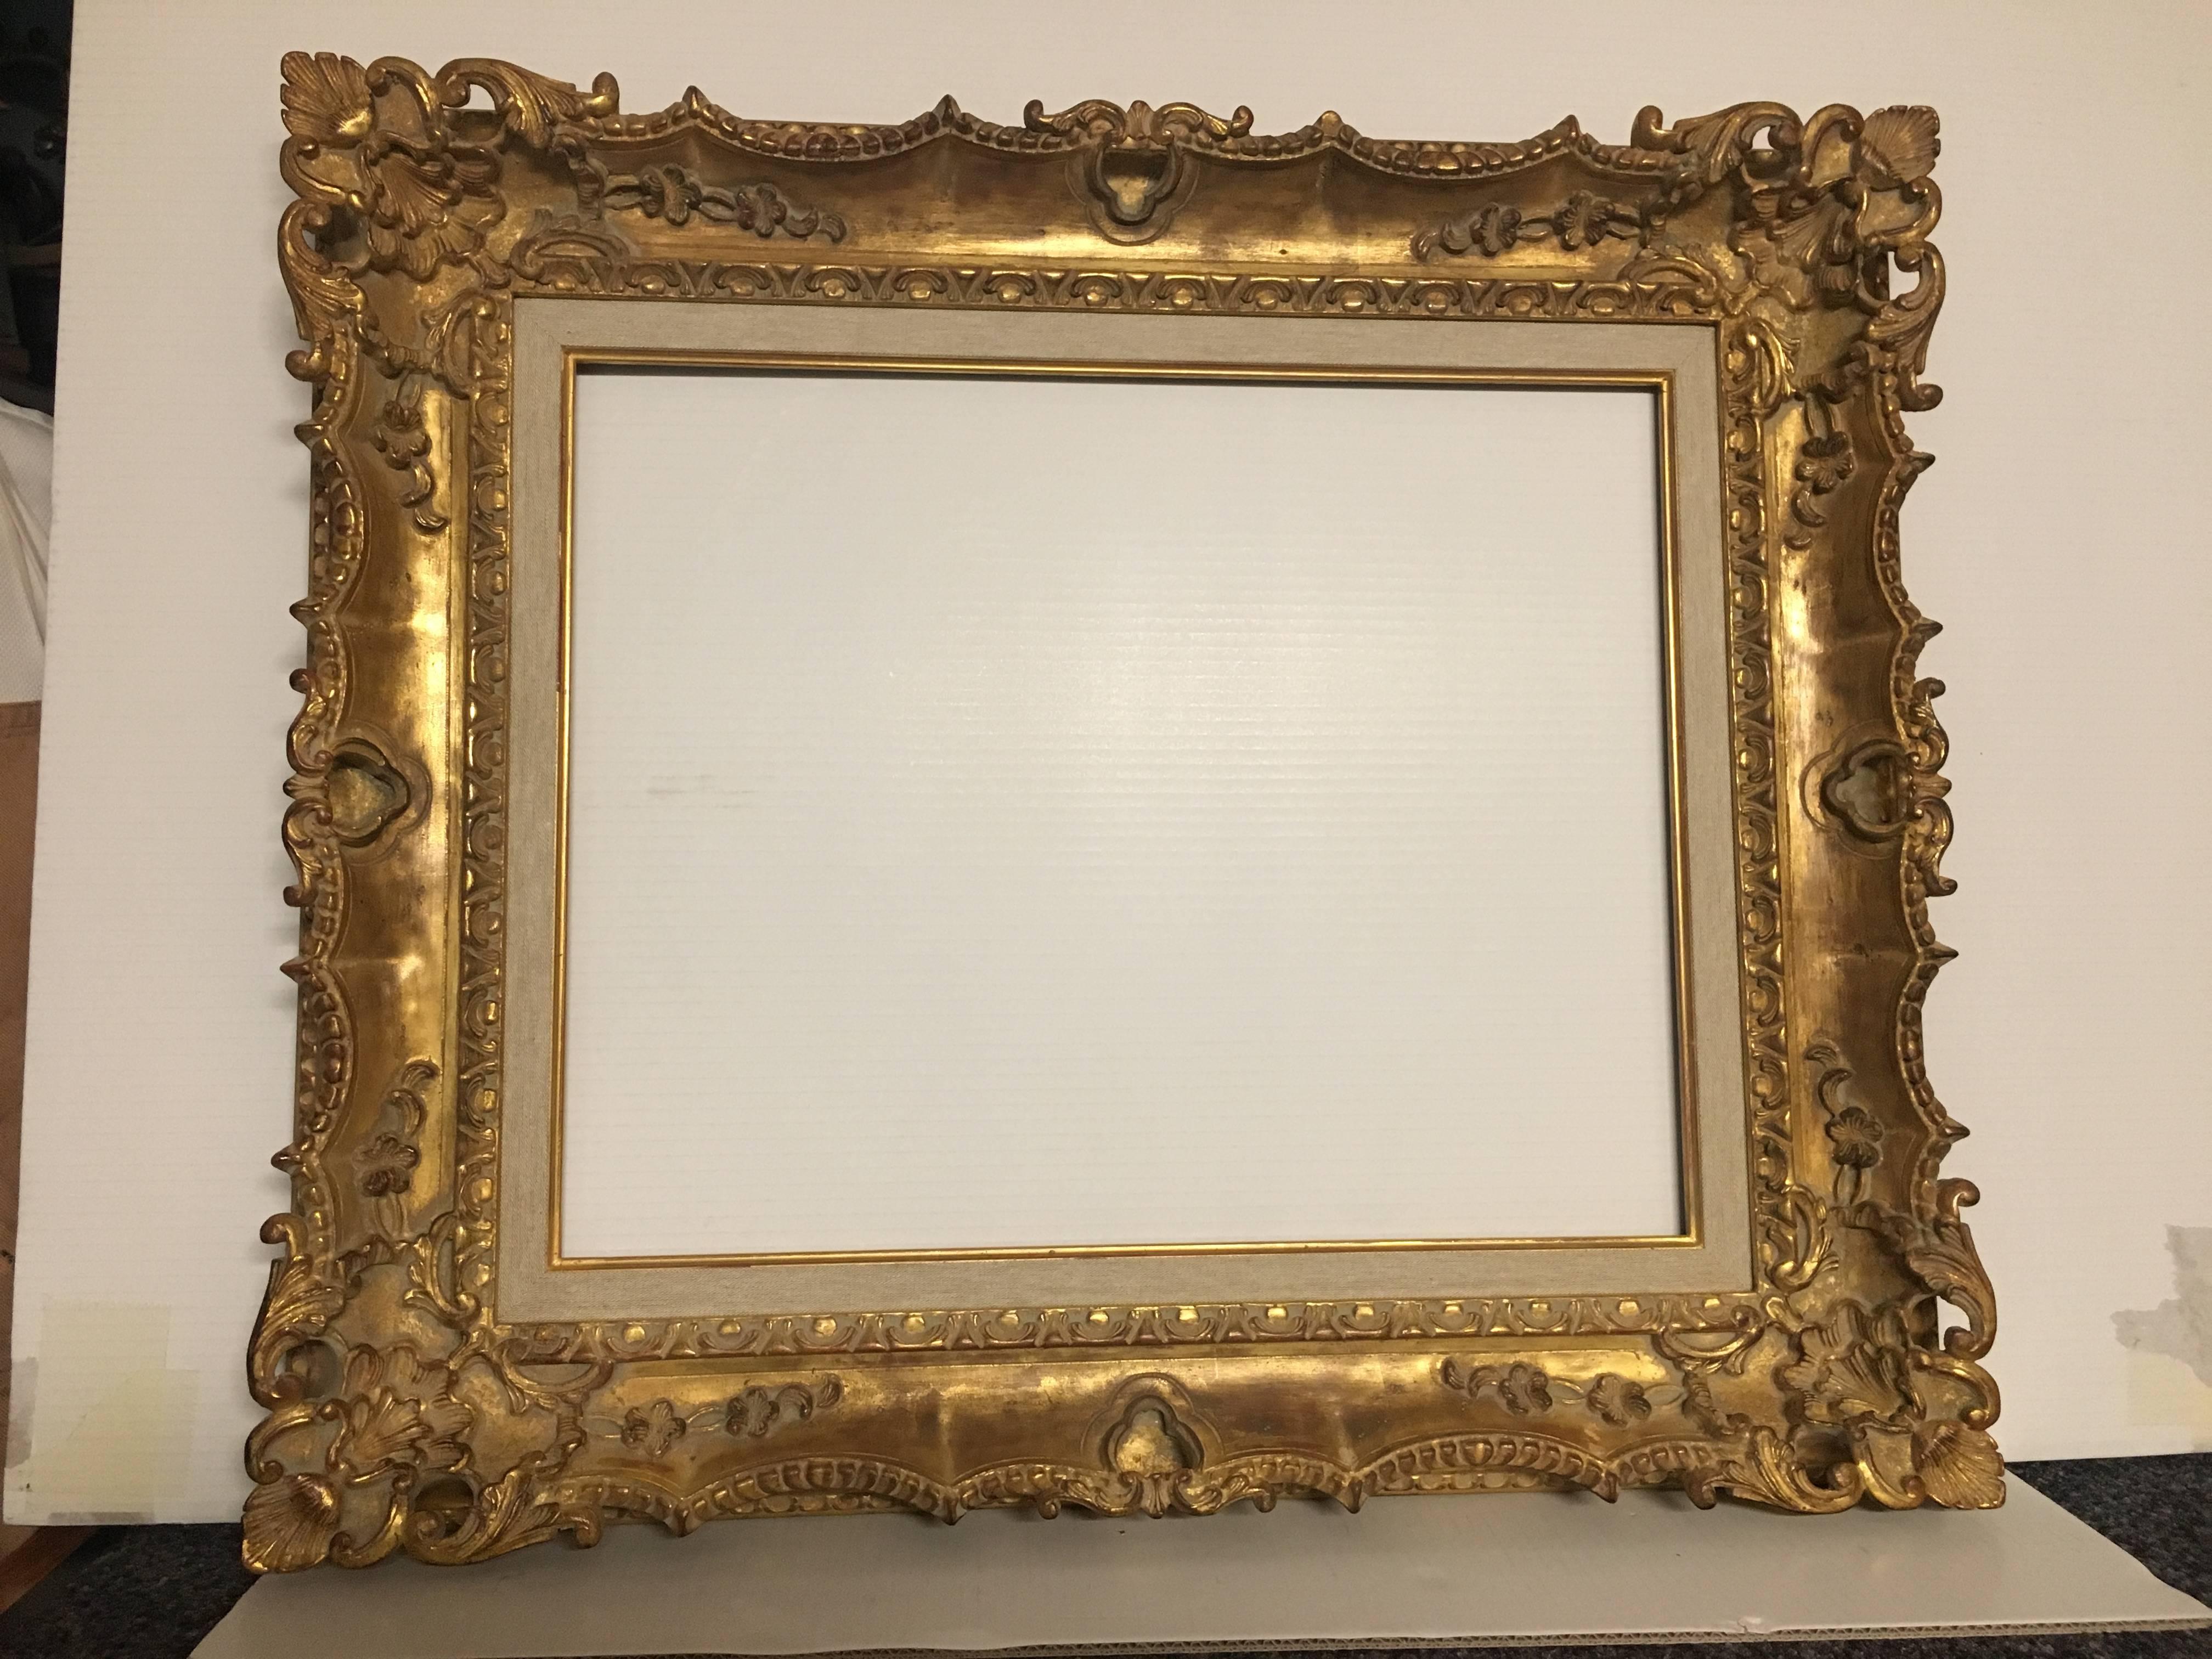 Italian contemporary hand-carved wood frame in French style with gold leaf cover and linen passe-partout. Available in custom sizes.
Measures: cm.59 x 6 x 69 (inside cm. 48 x 38).
   